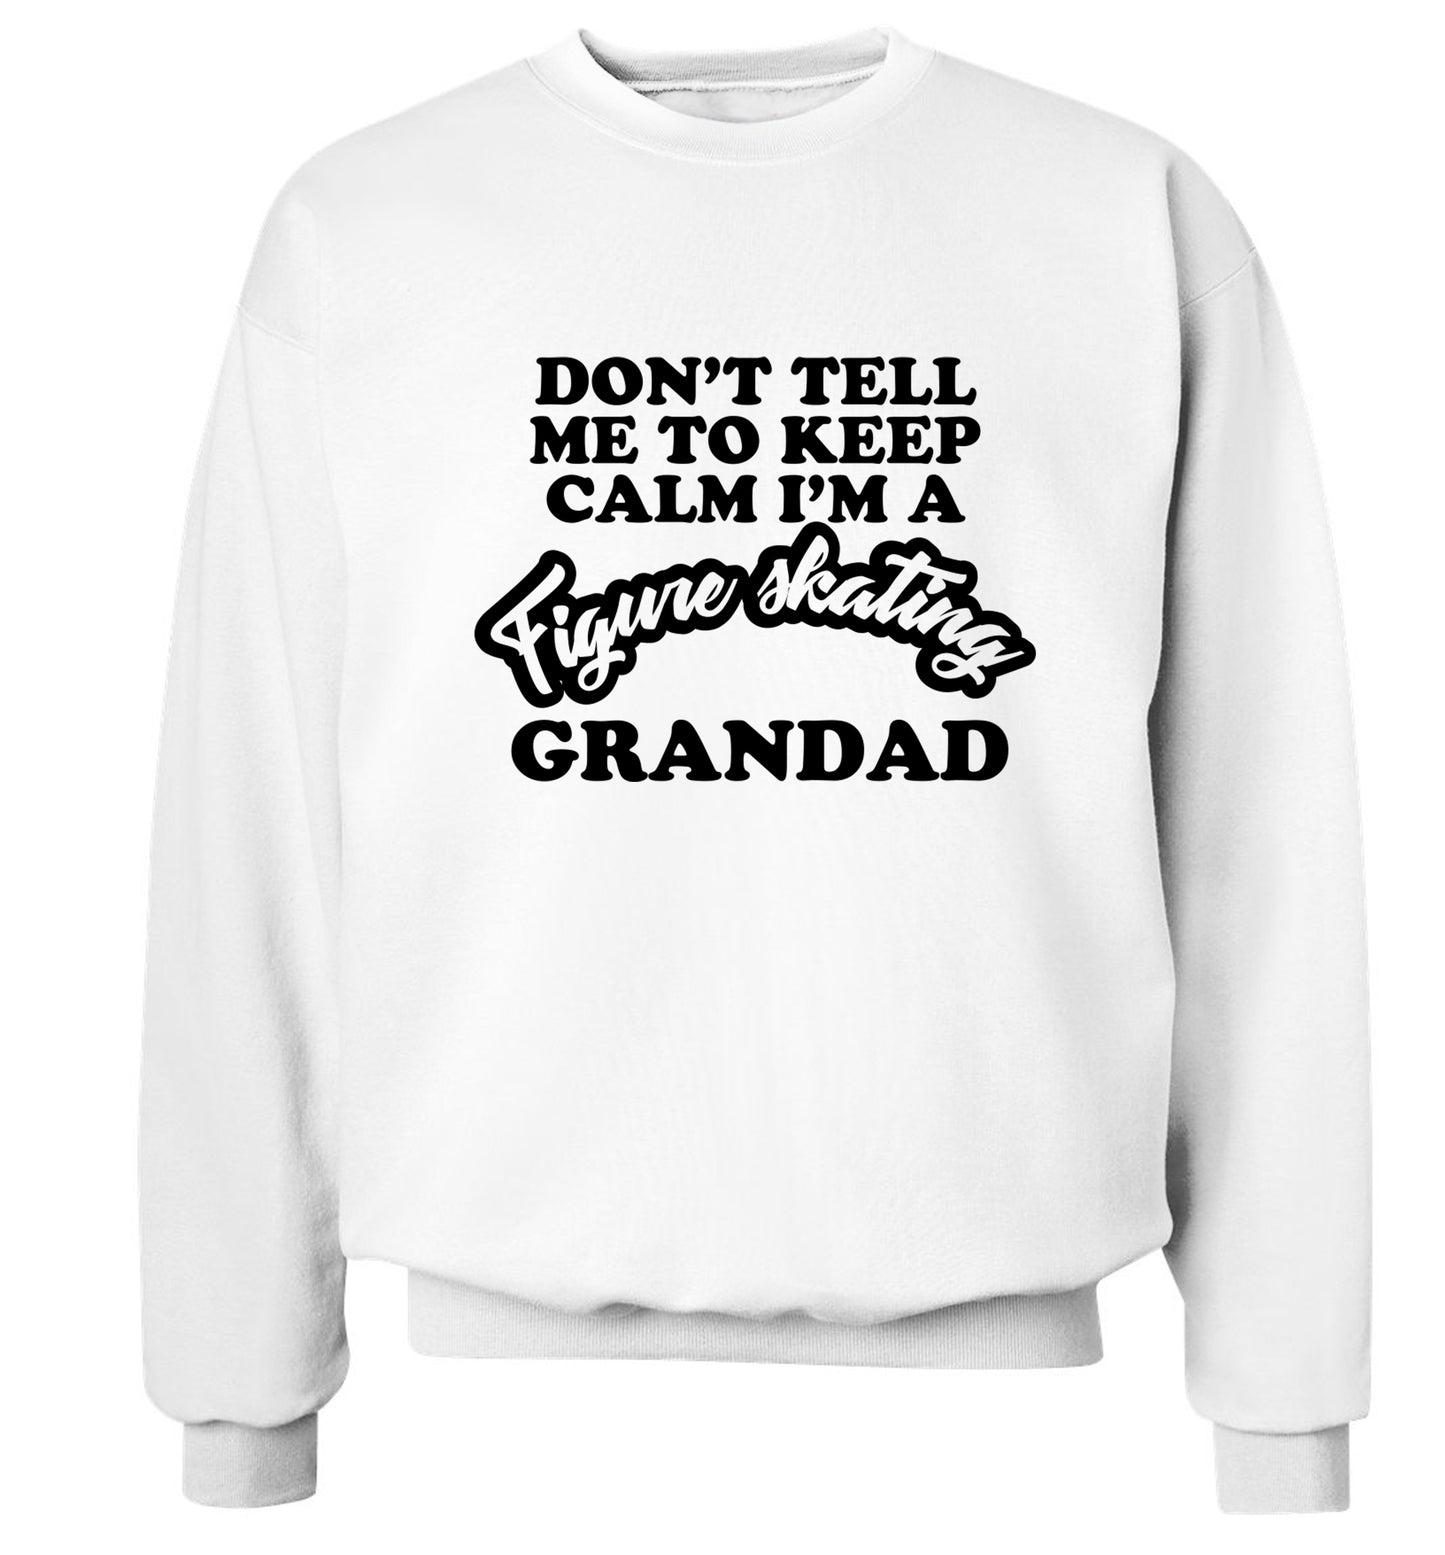 Don't tell me to keep calm I'm a figure skating grandad Adult's unisexwhite Sweater 2XL